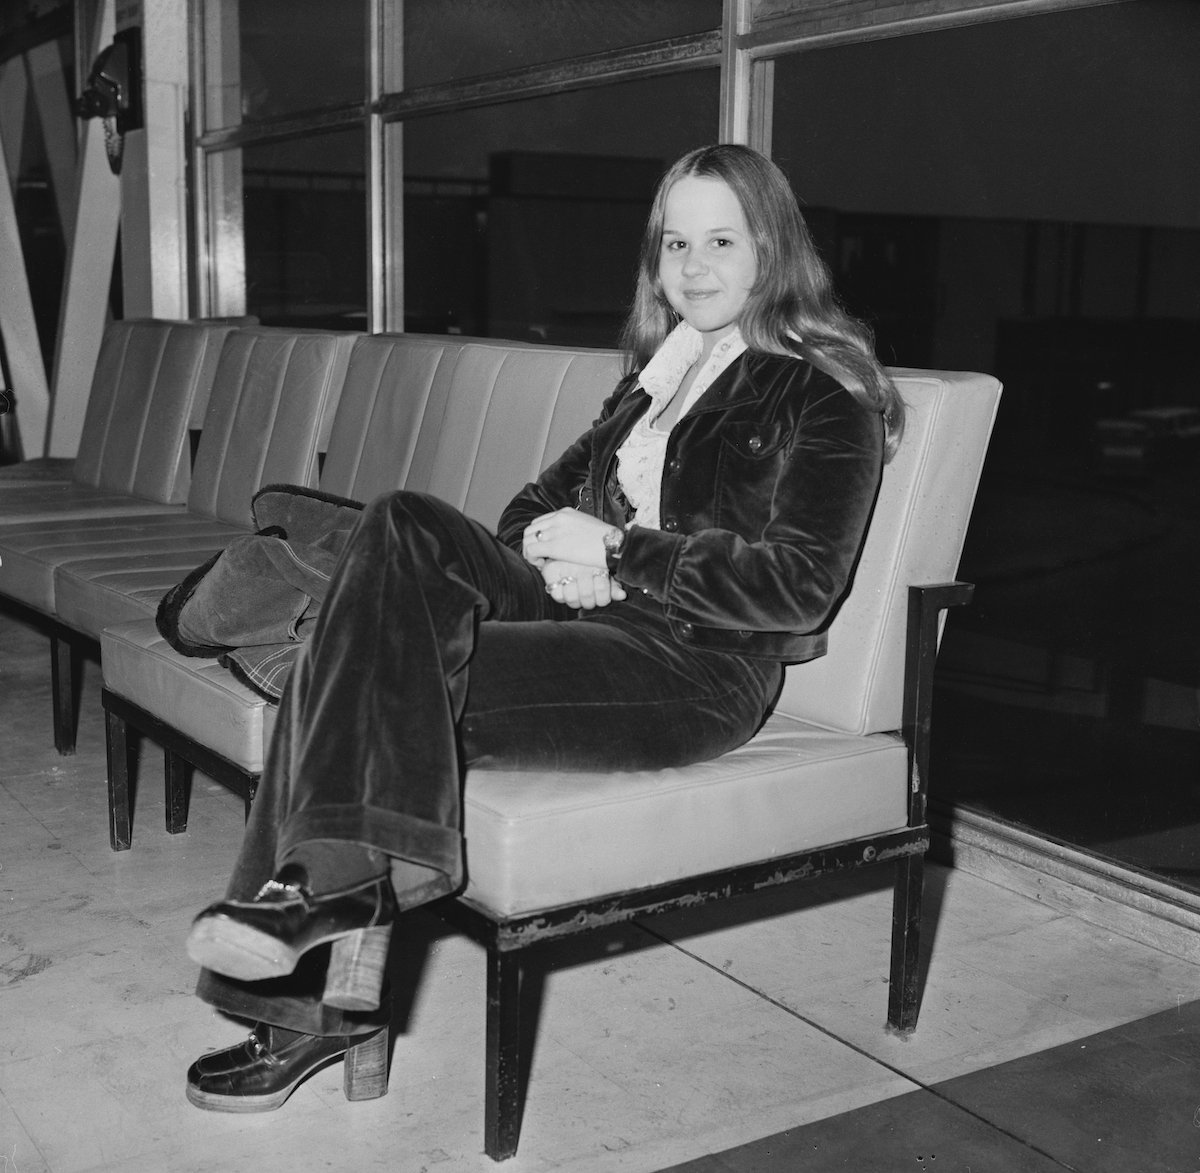 Linda Blair smiling, seated, in a black and white photo from 1974